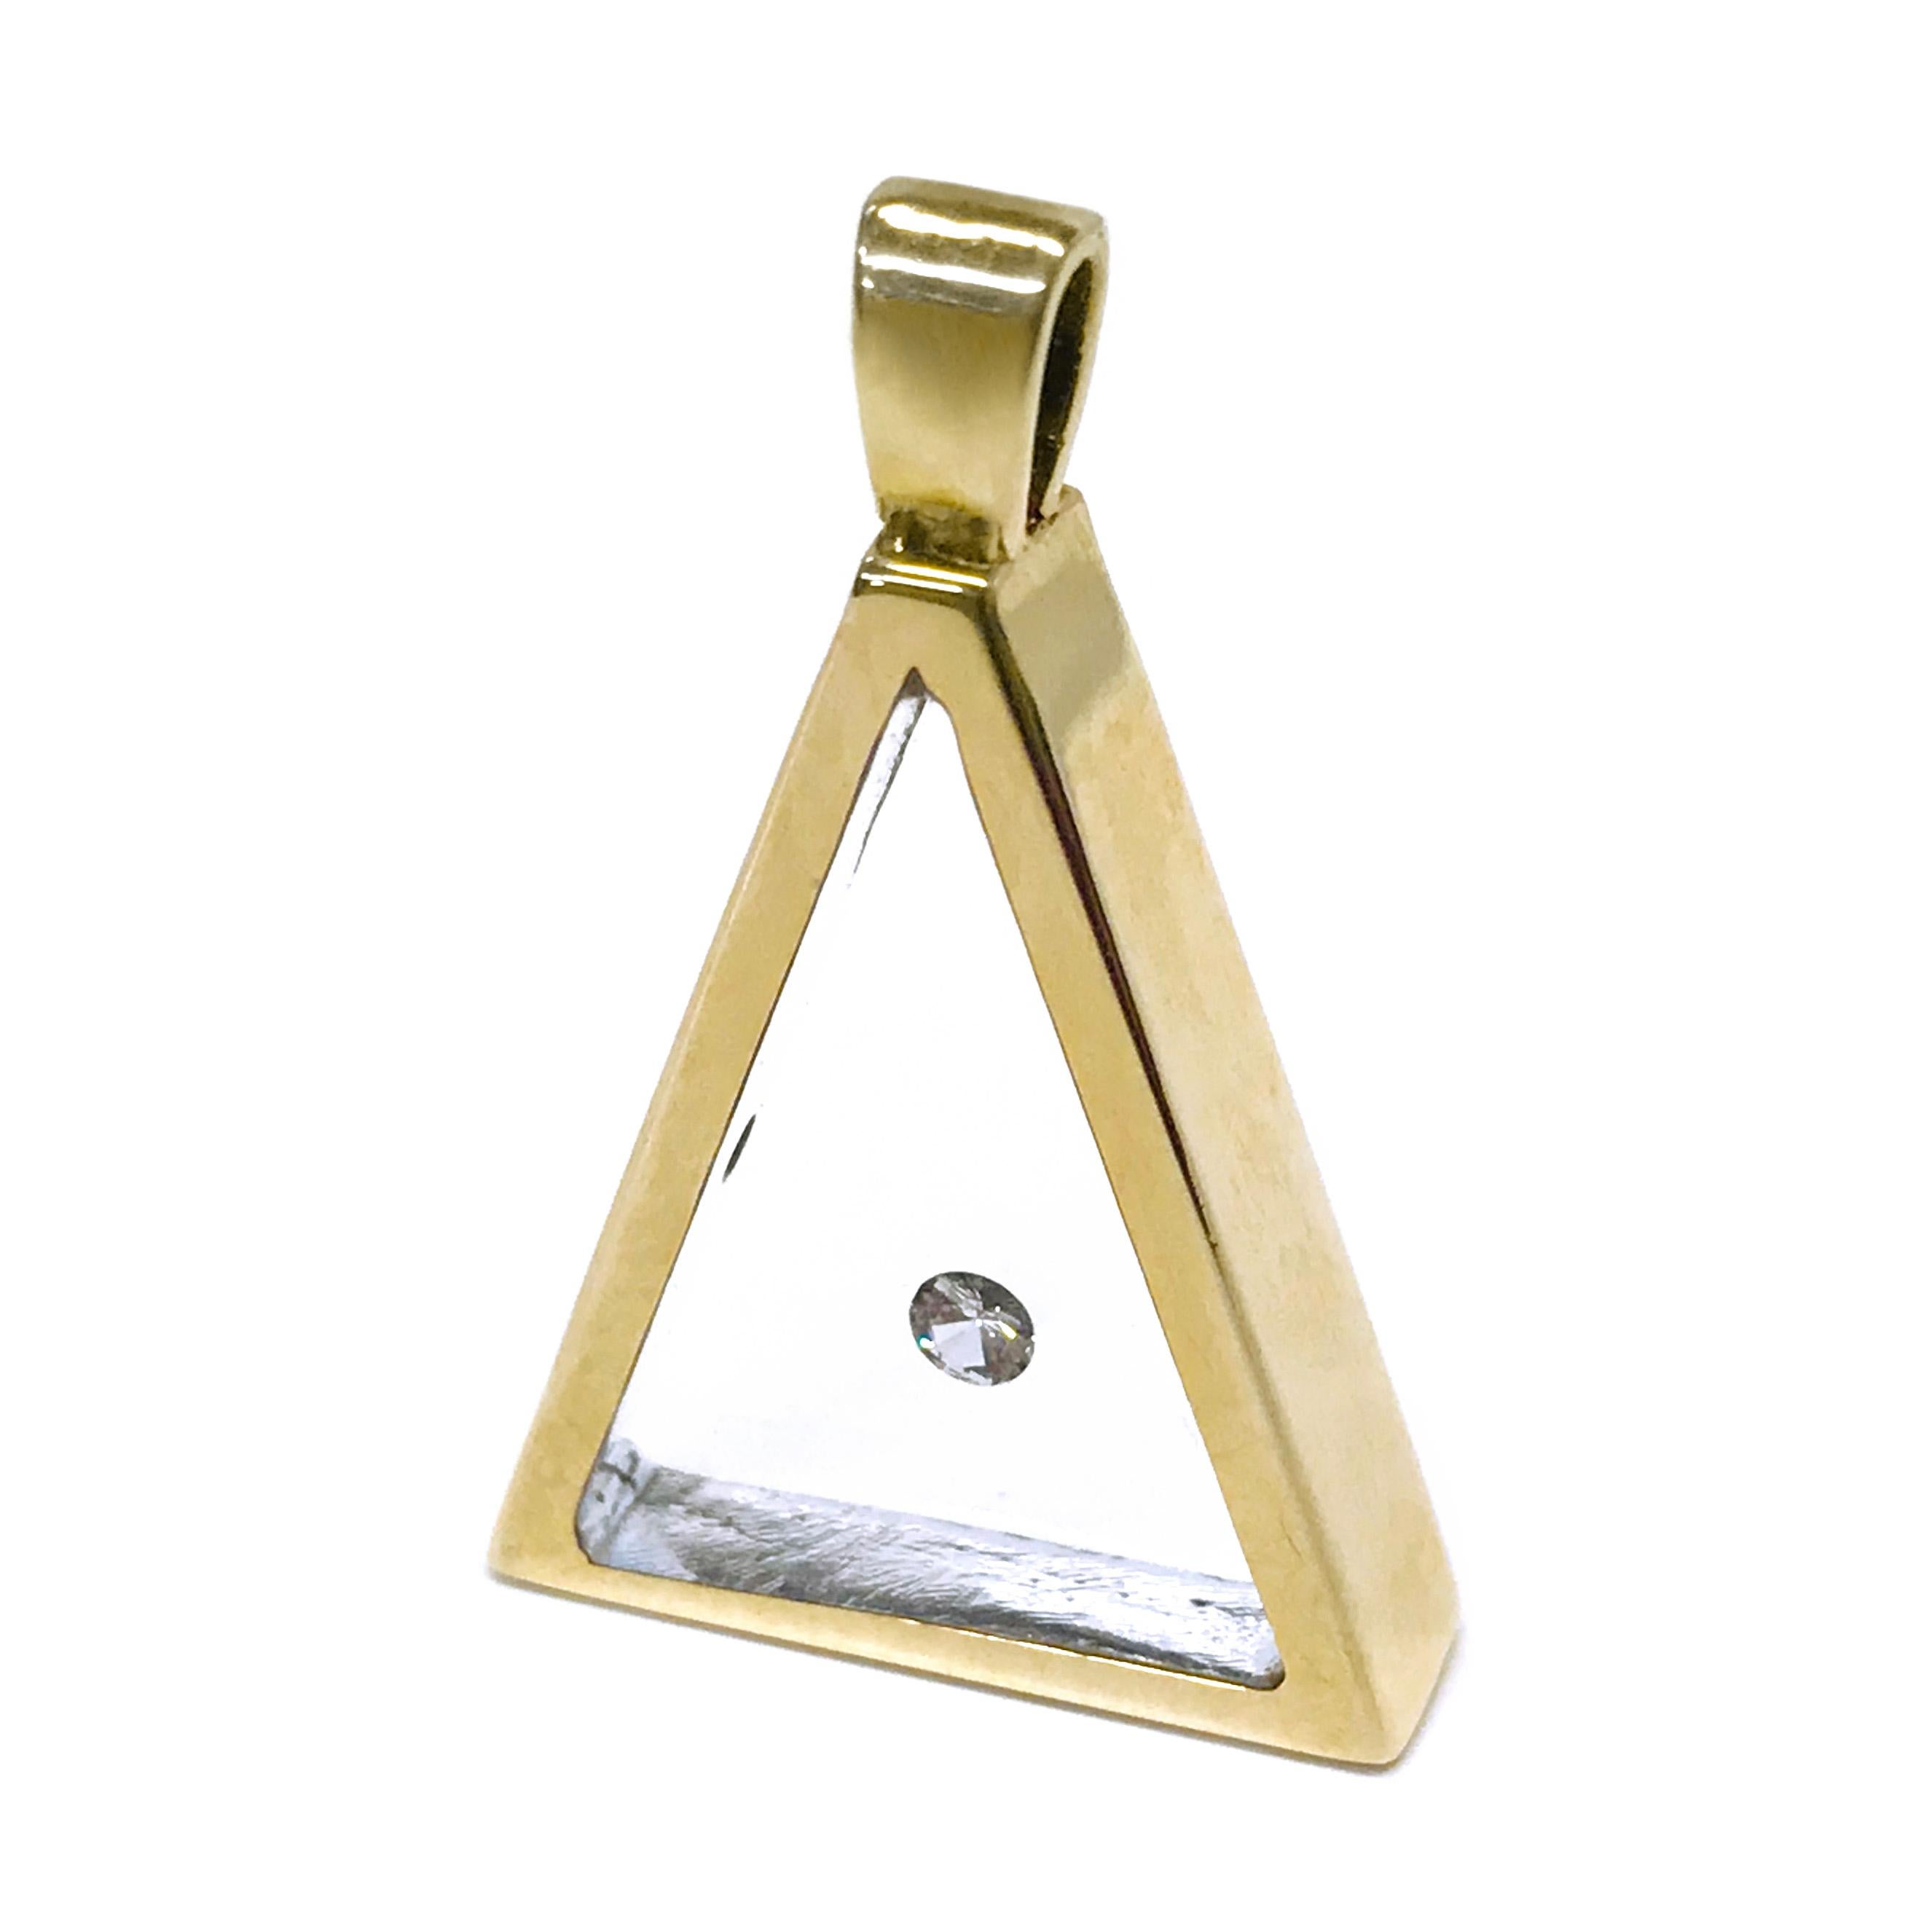 Incogem Floating Diamond Triangle Pendant: 14k Yellow Gold. The pendants are handcrafted of recycled 14k yellow gold. The diamond is a brilliant-cut, 58 facets, VS1 in clarity (G.I.A.), and H in color (G.I.A.). The diamond weighs 0.05 carat and